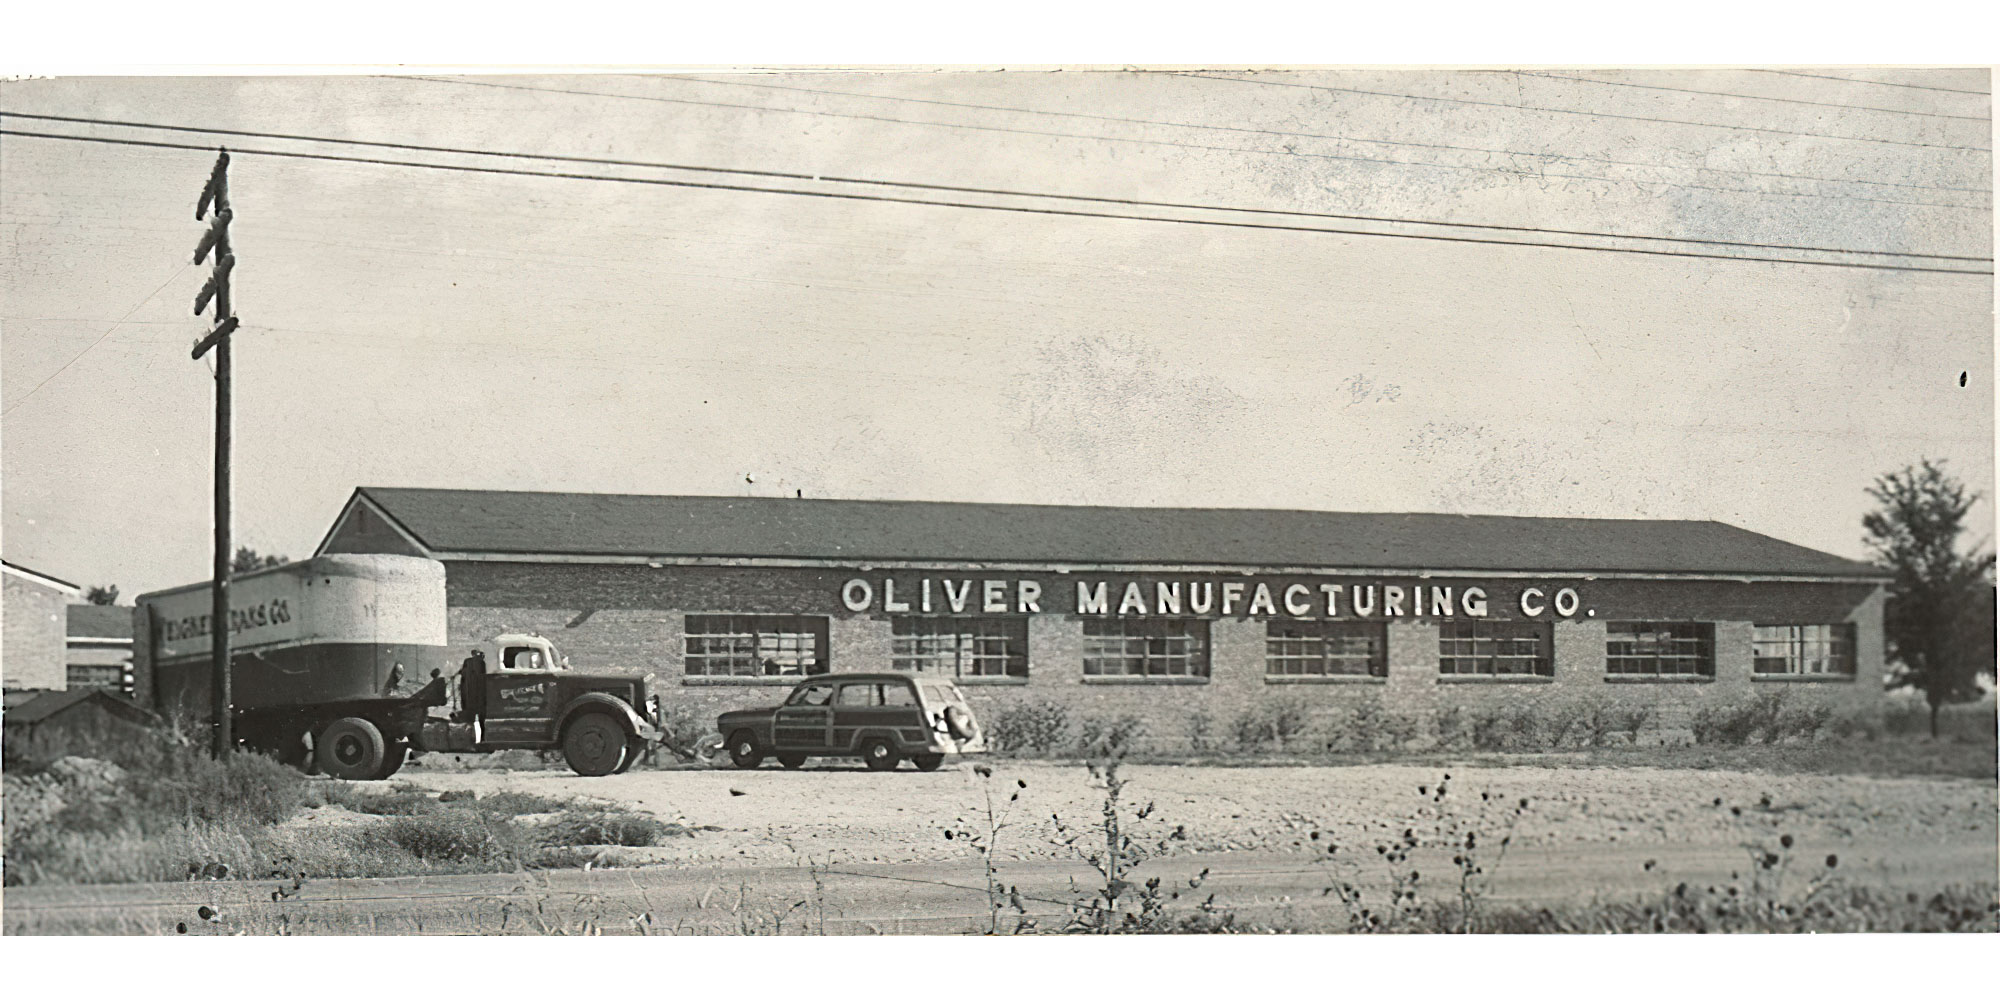 The new Oliver Manufacturing plant as it appeared in 1952.